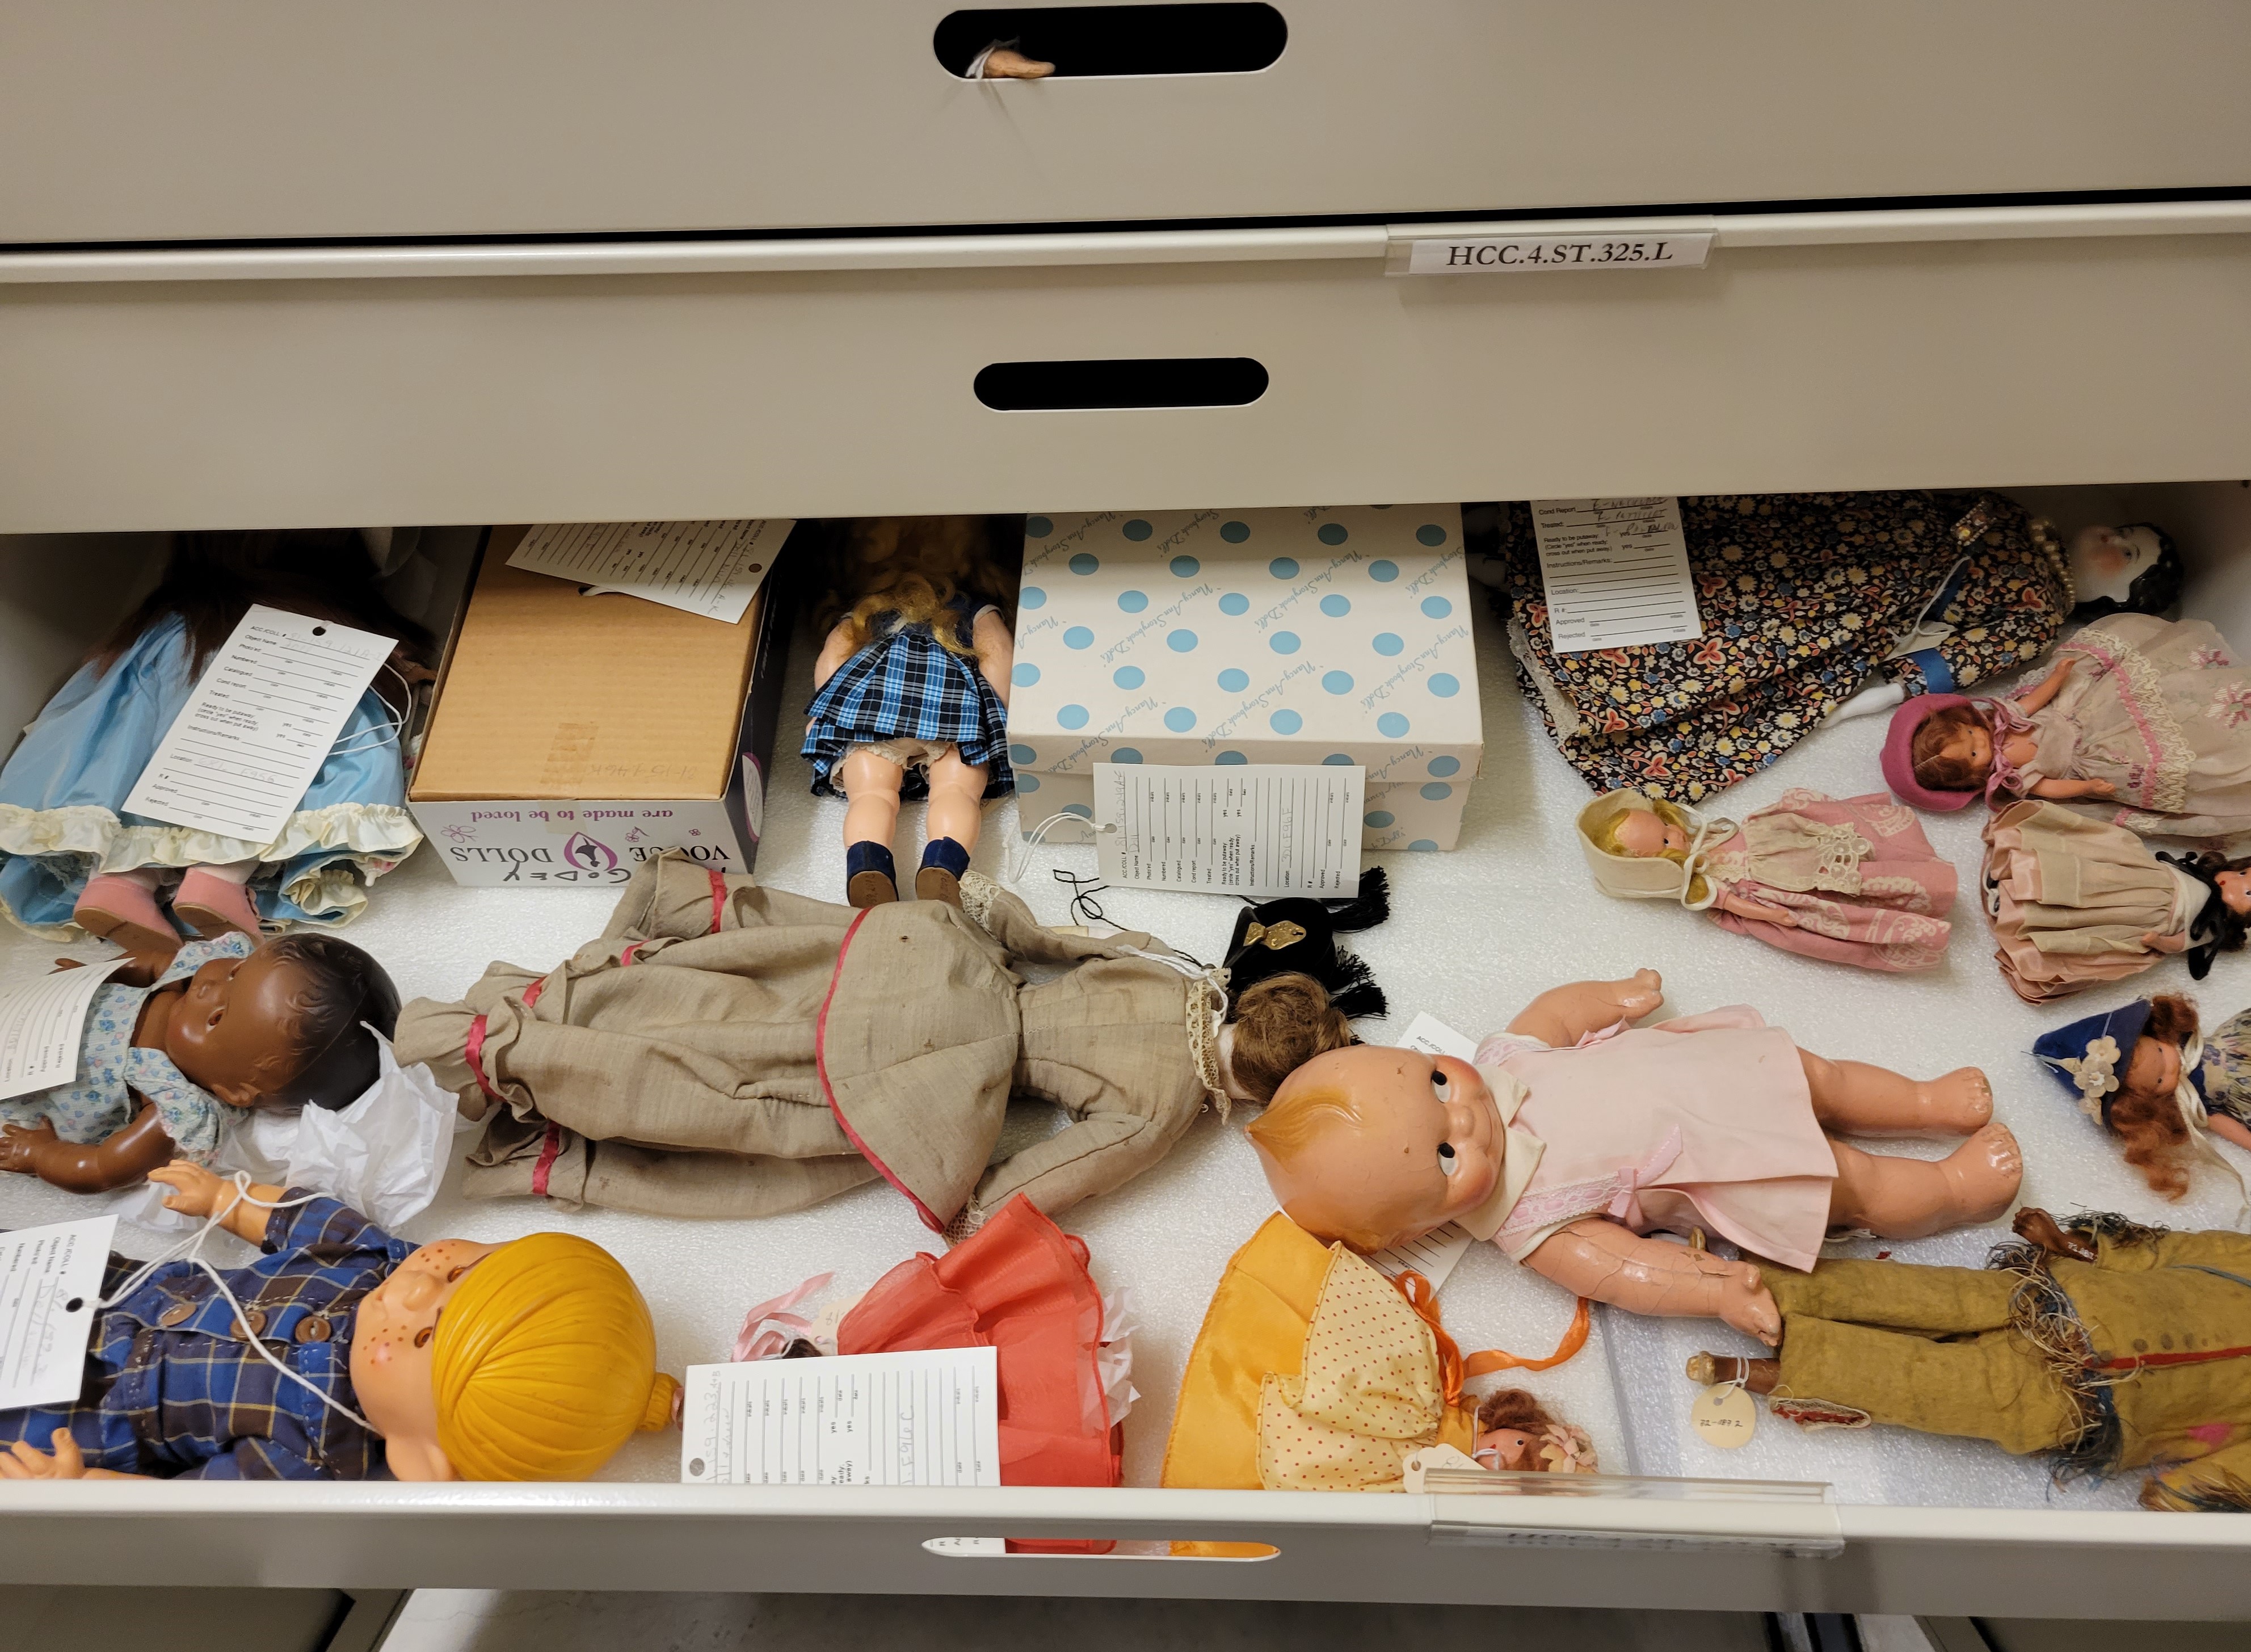 Photo of a white metal storage cabinet with drawers. The third drawer down has been pulled out and it is full of small dolls of different ages, sizes, and ethnicities. In the lower left corner is a plastic Dennis the Menace doll, facing upwards, and on the right amongst the other dolls a Kewpie doll in a pink dress is visible.